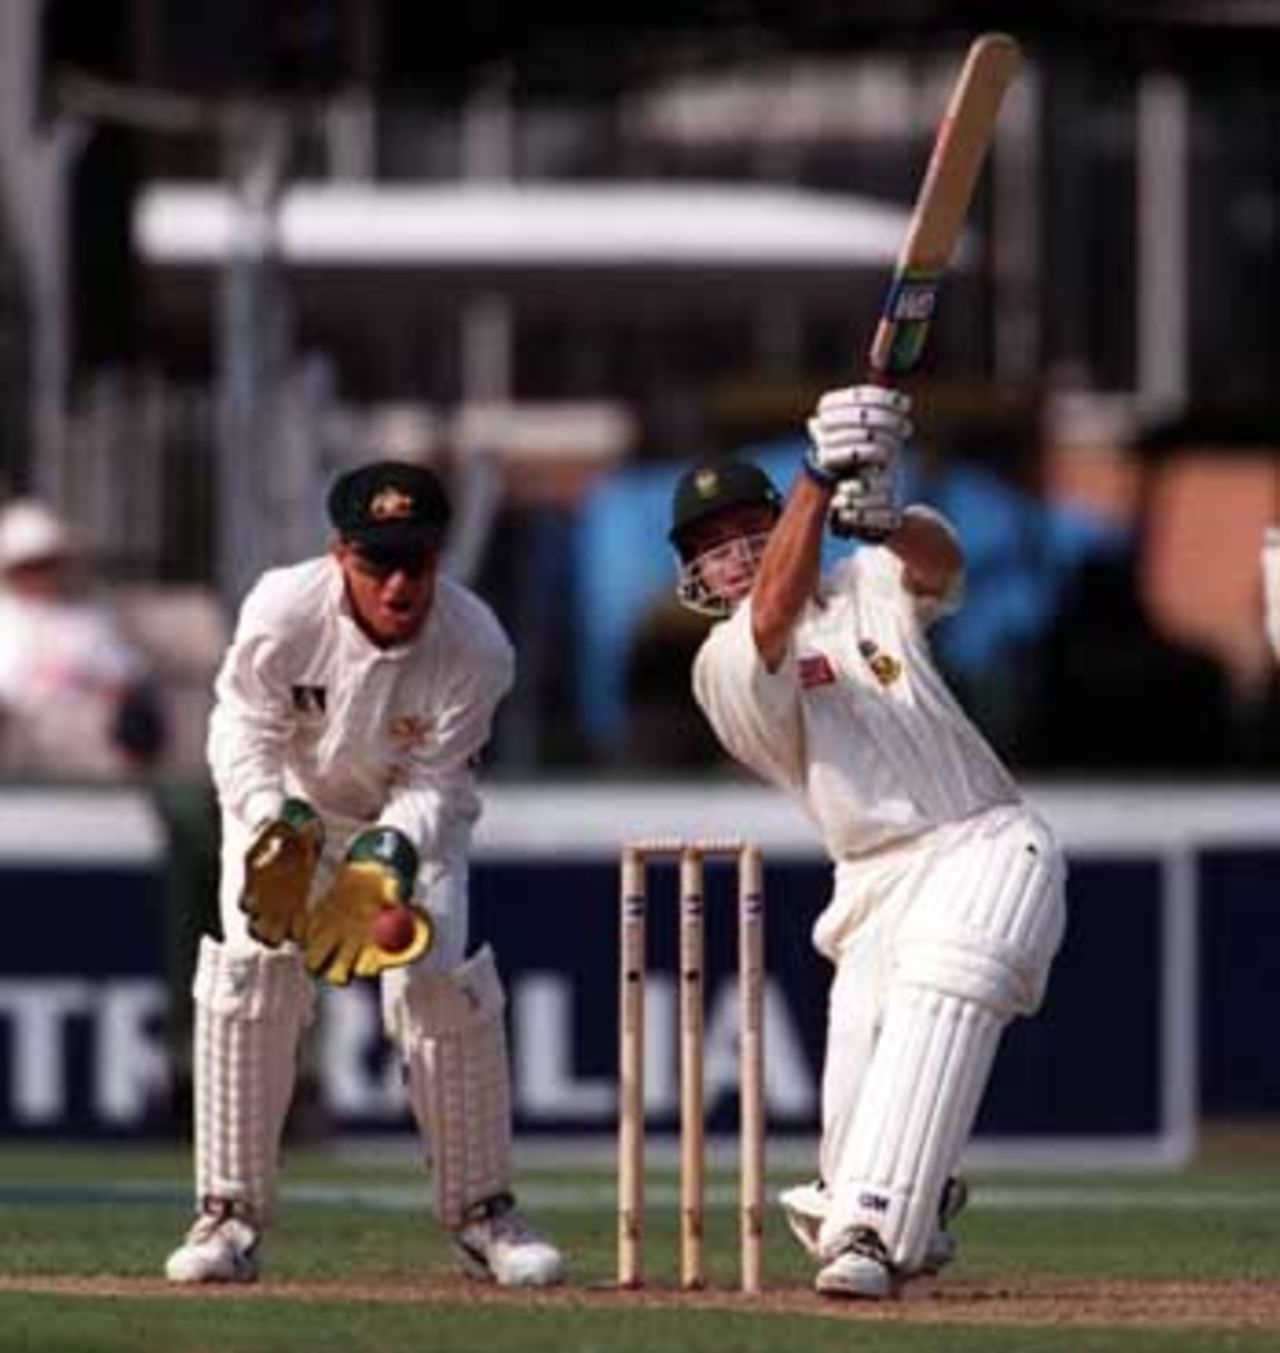 Herschelle Gibbs tries to drive Michael Bevan but his snick is taken by Ian Healy and he is out for 54...Australia v South Africa, Day 1, 2nd Test, Friday January 2nd 1998.